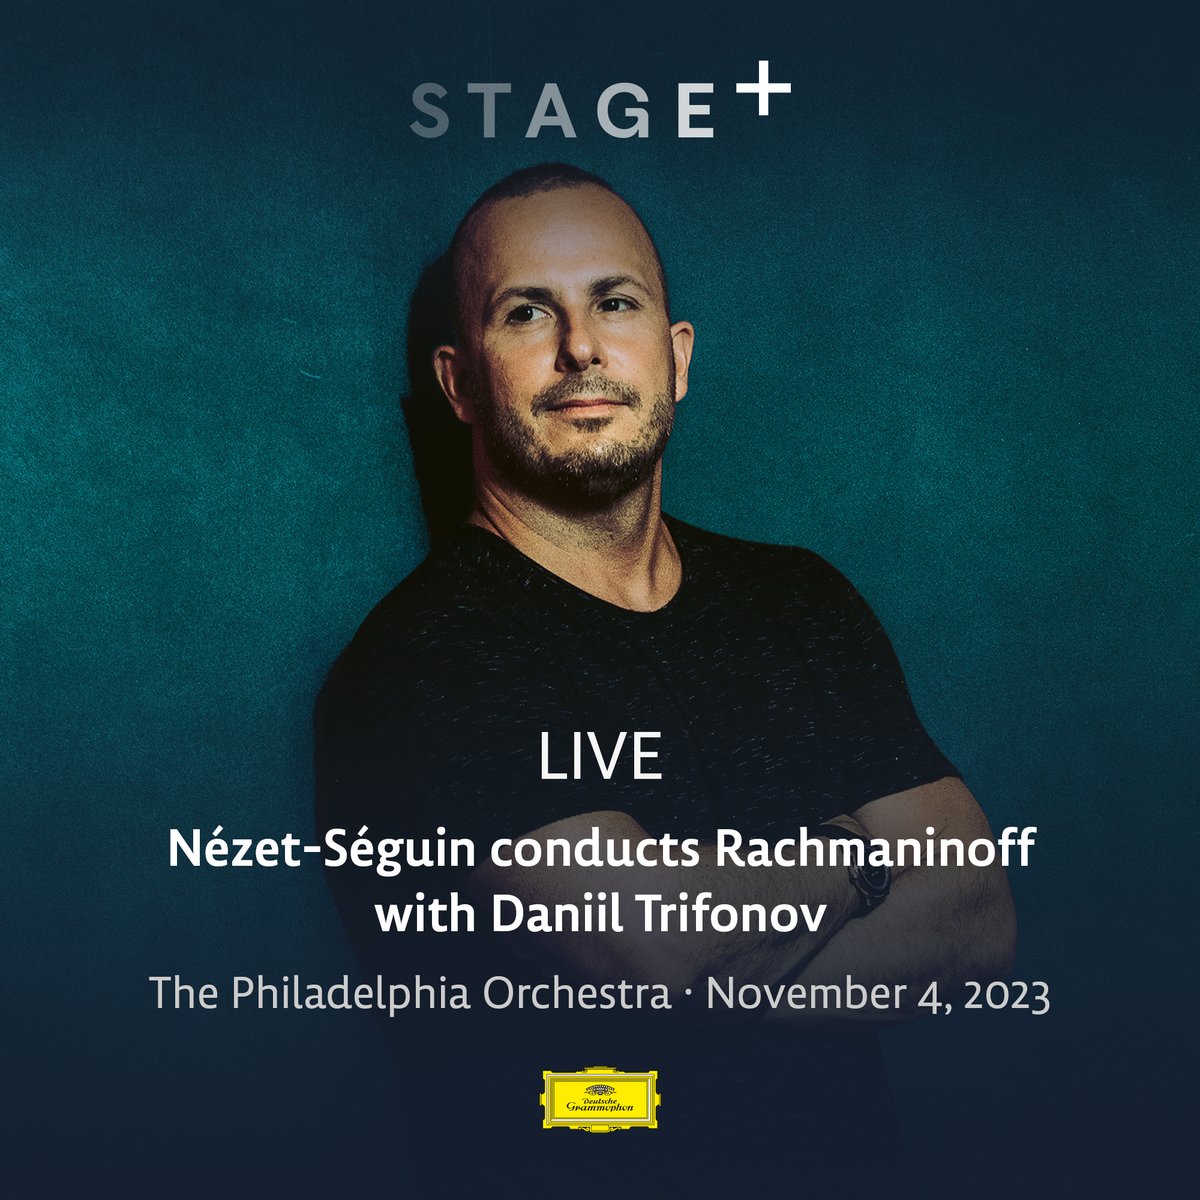 Pianist @daniil_trifonov is reunited with the @philorch and @nezetseguin for a performance of Rachmaninoff’s Rhapsody on a Theme of Paganini, while the orchestra and conductor also present the composer’s Vocalise as well as the Symphony No. 1. Tune in at stage.plus/TrifonovRachma…